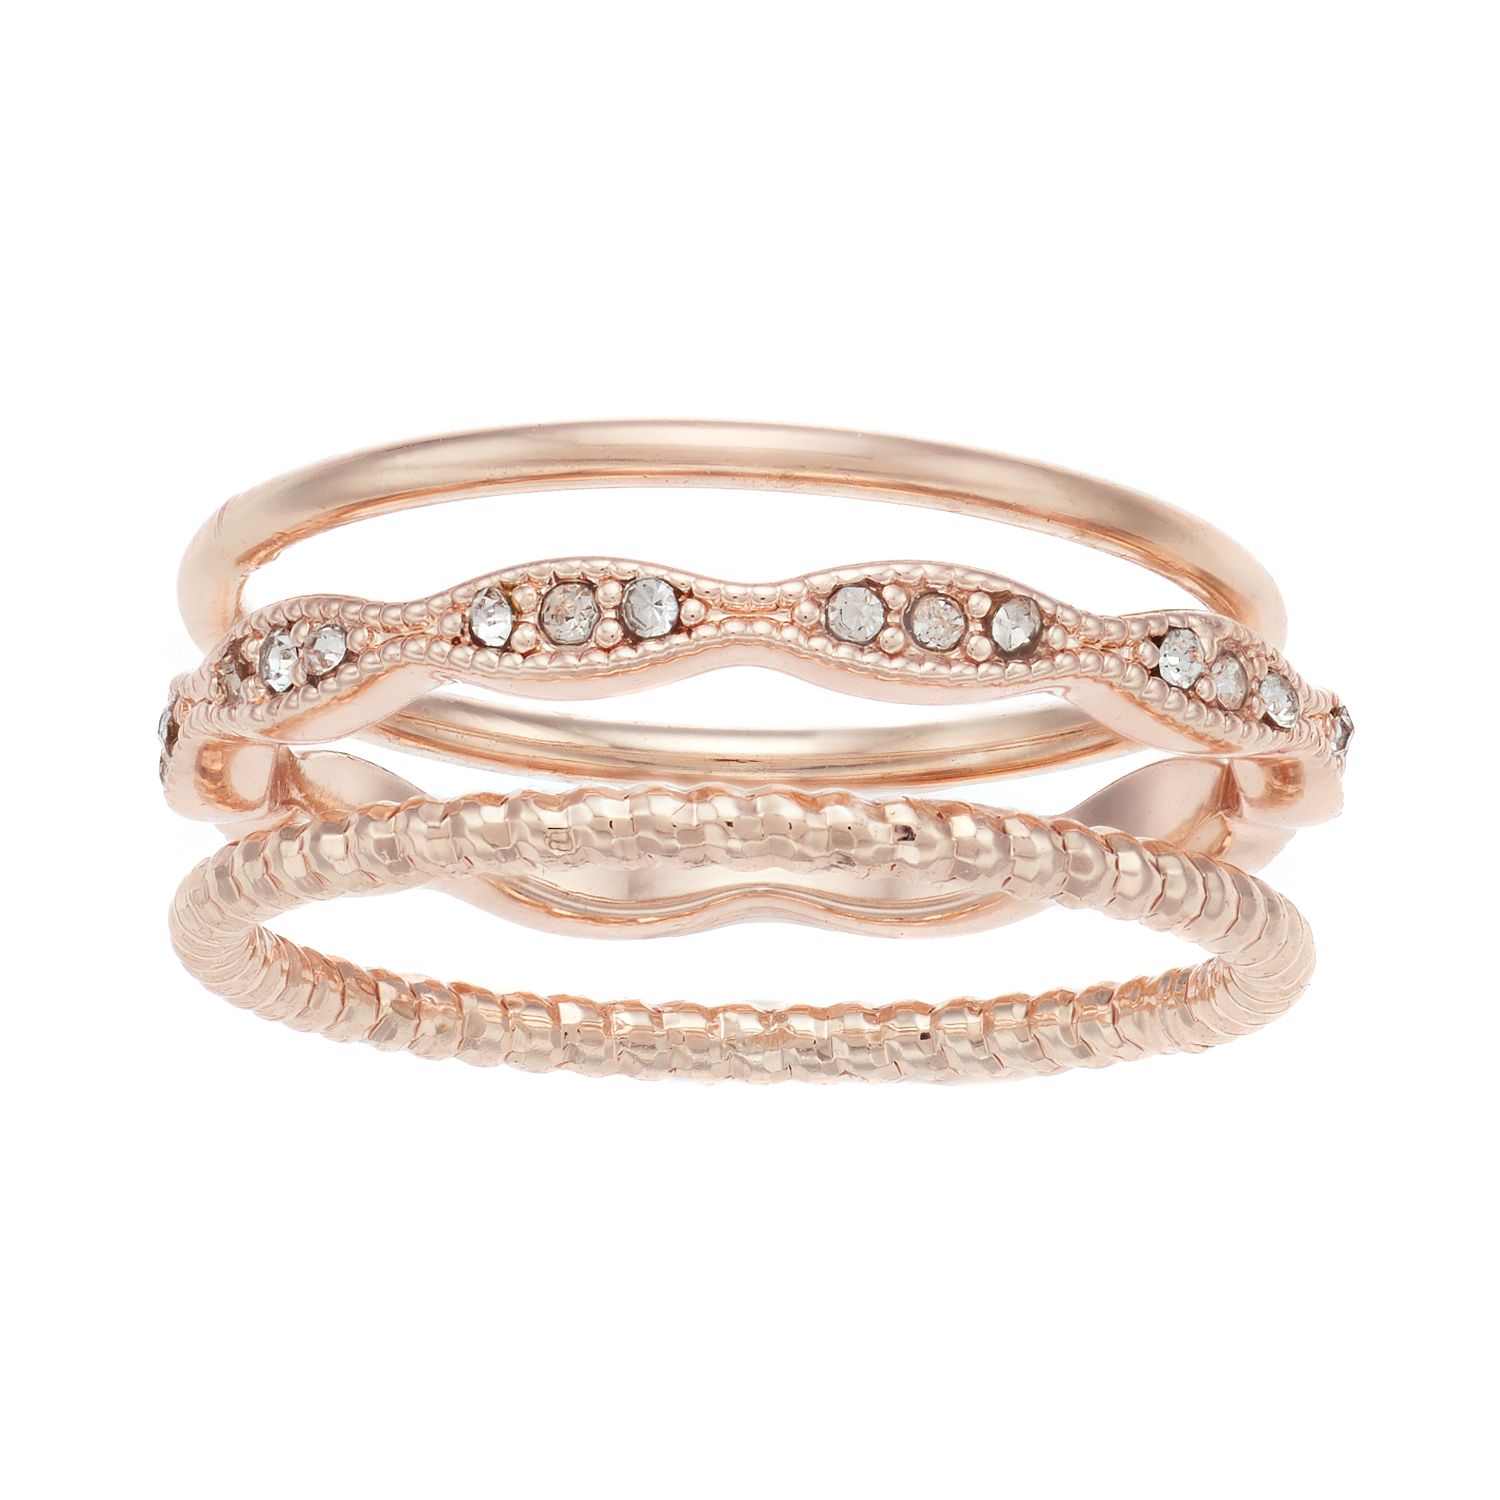 Image for LC Lauren Conrad Gold Tone Pave Wavy Ring Set at Kohl's.